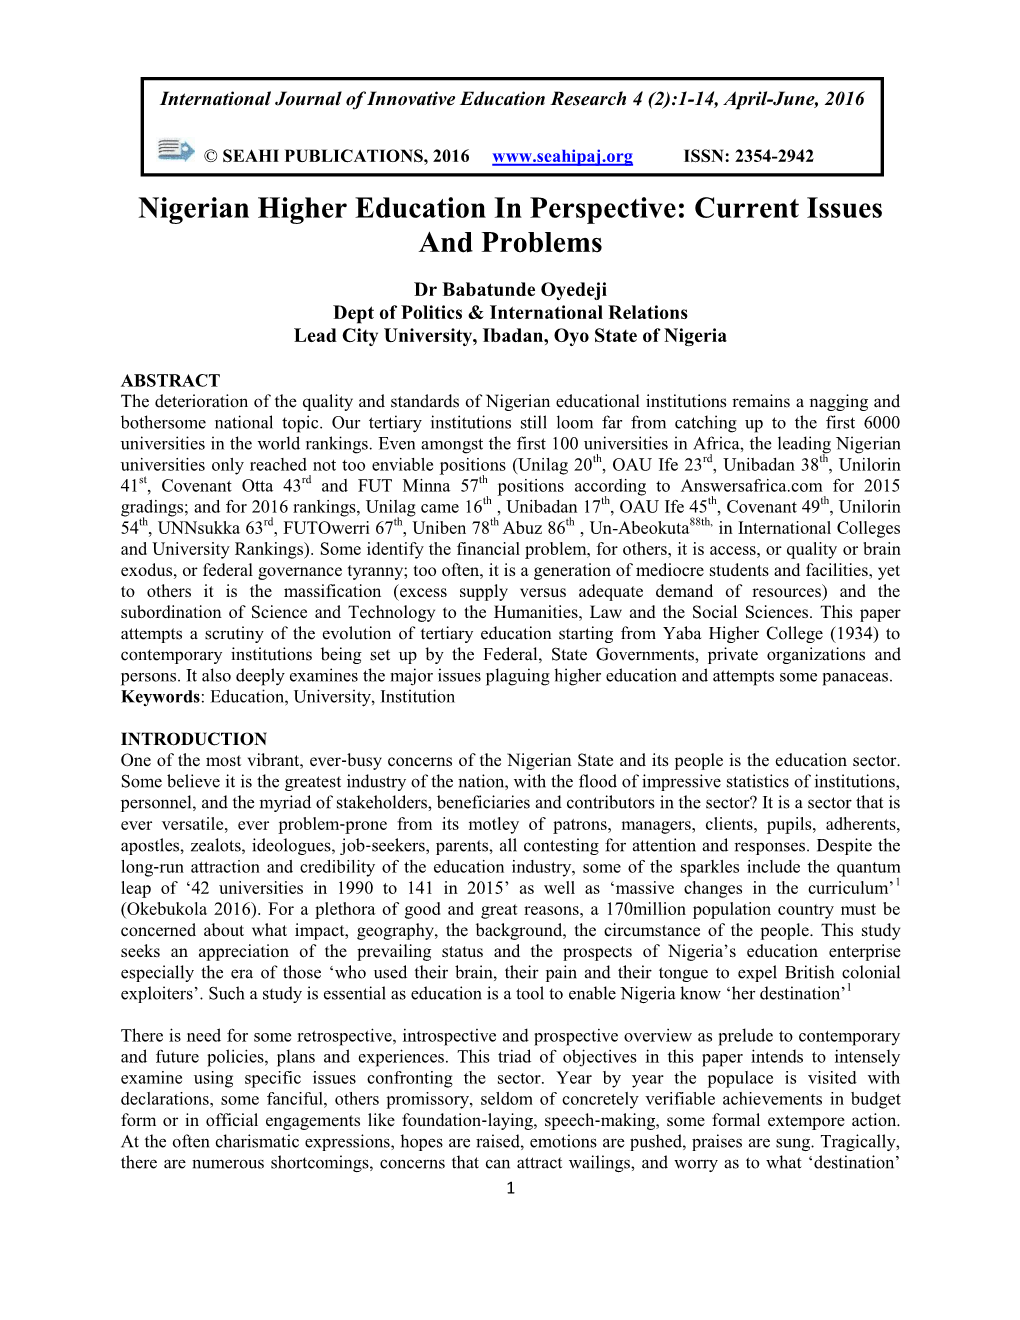 Nigerian Higher Education in Perspective: Current Issues and Problems